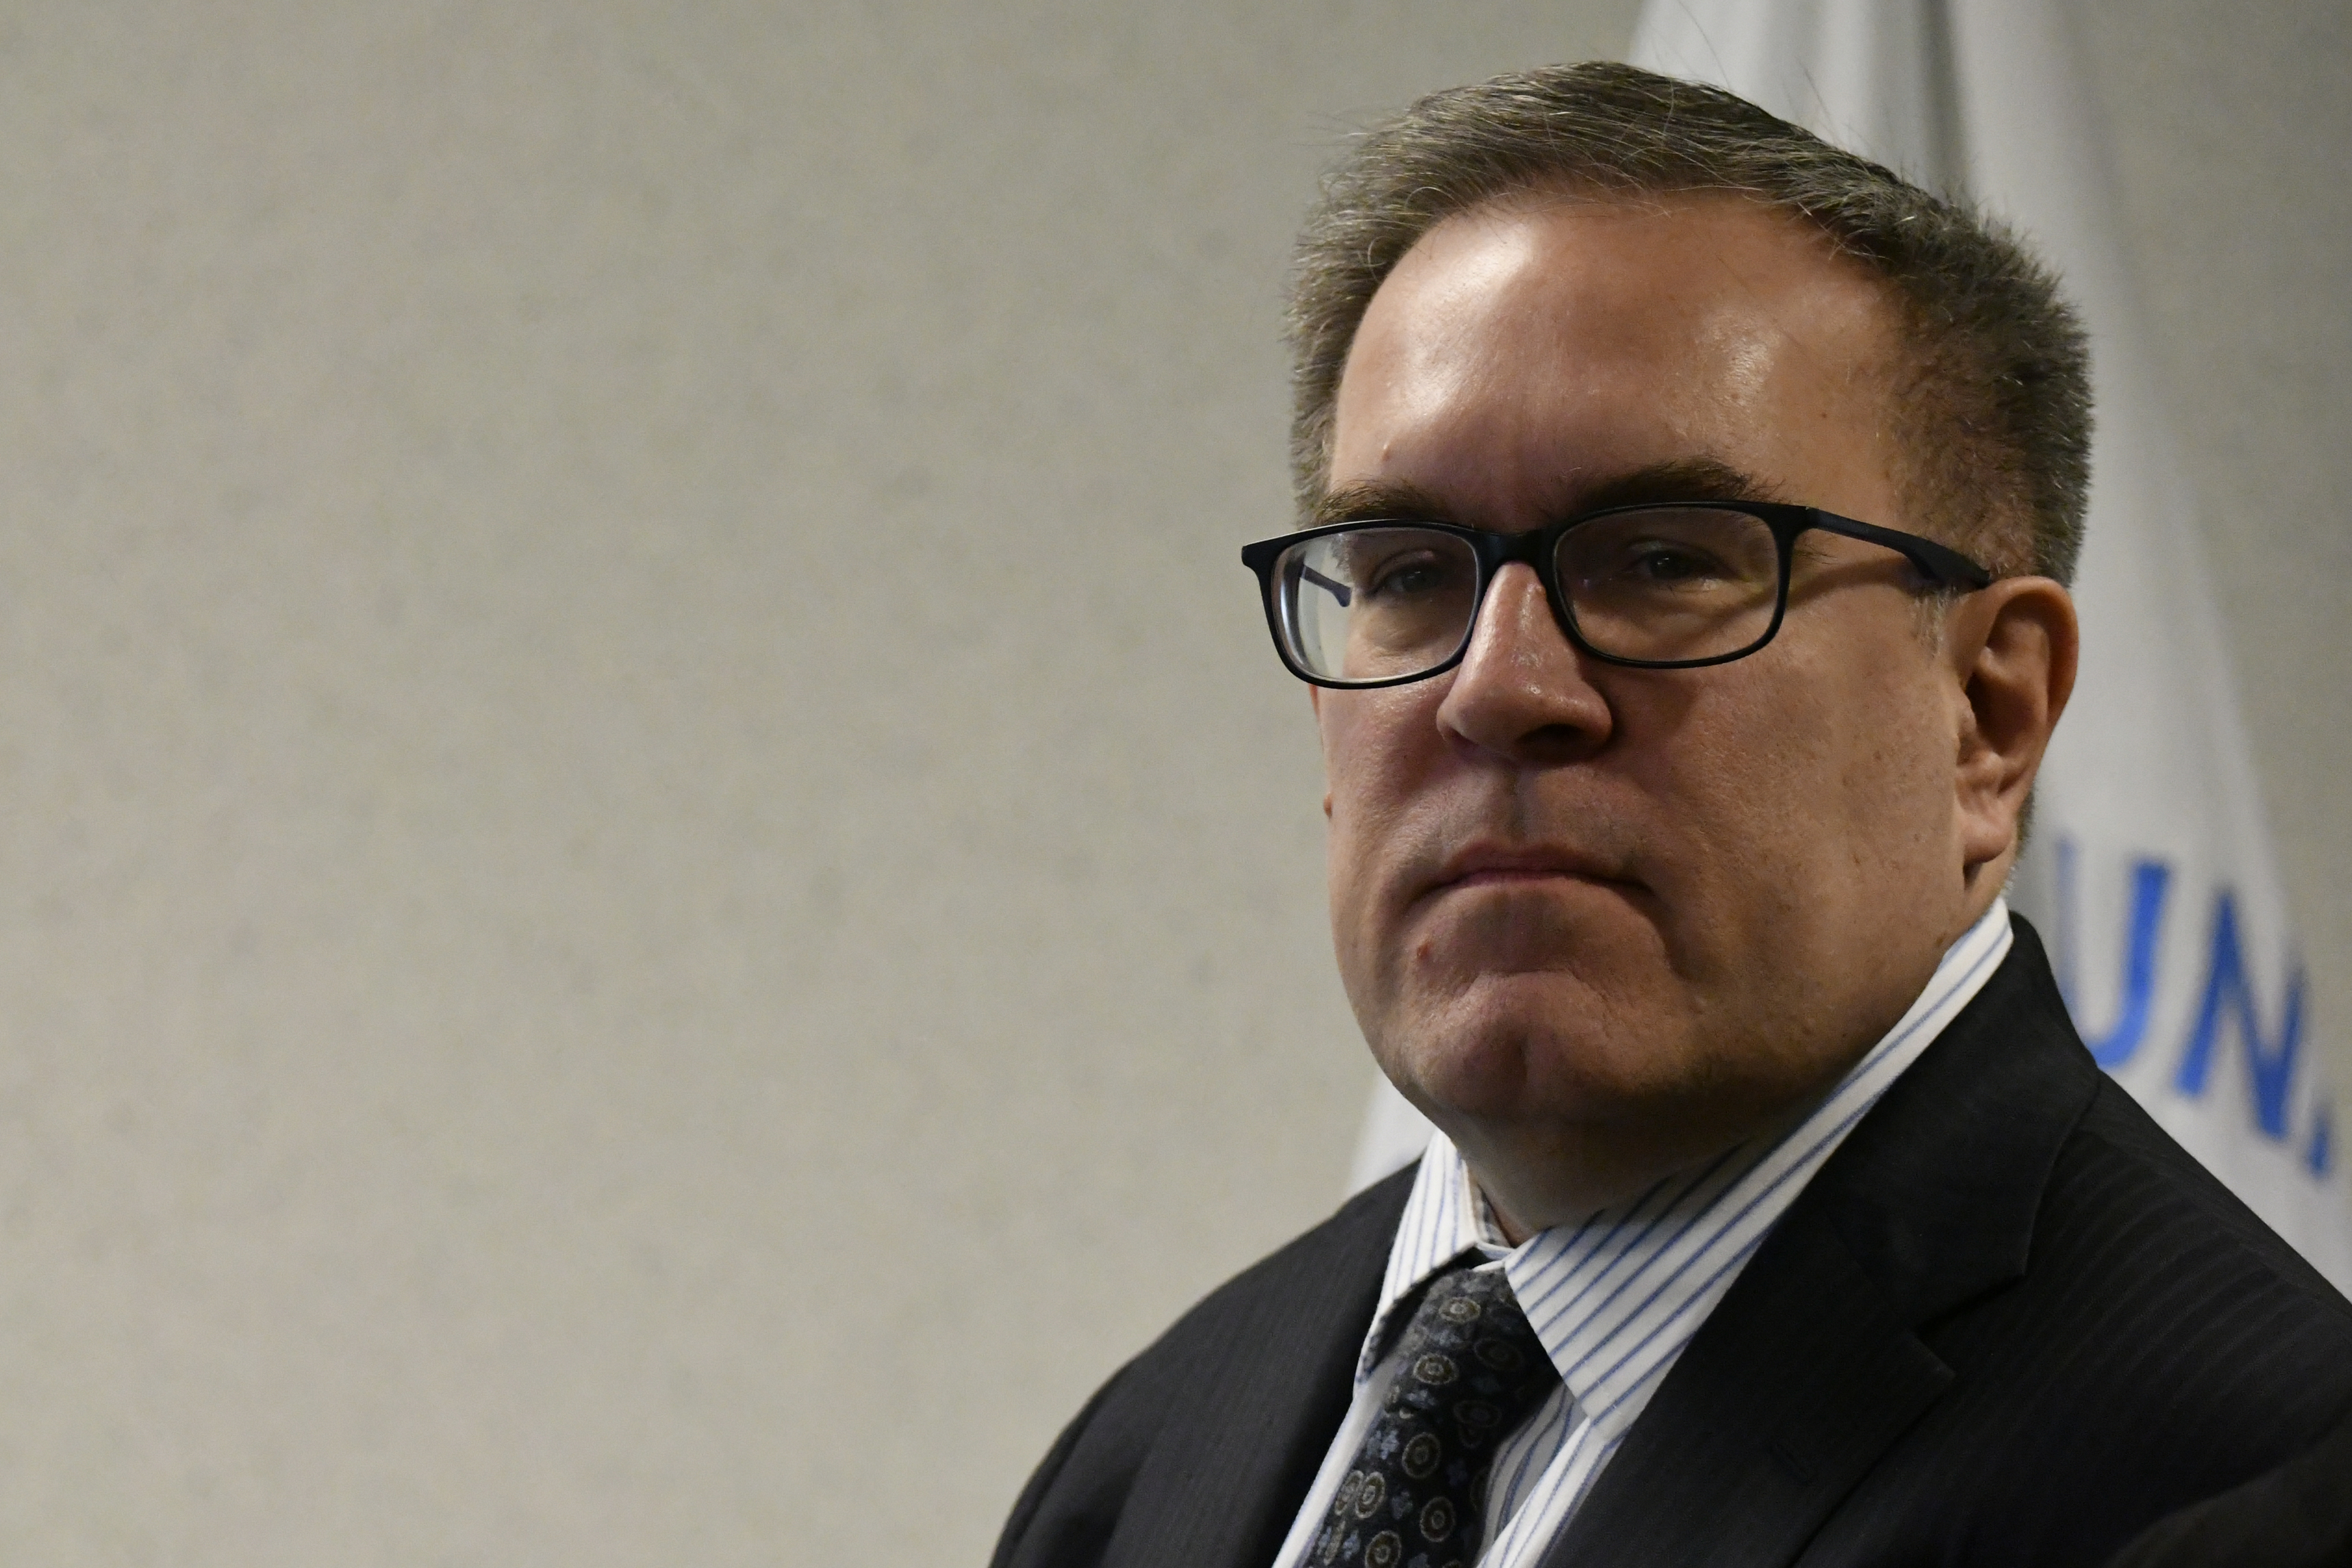 Former coal lobbyist Andrew Wheeler has been confirmed by the Senate as the next Environmental Protection Agency administrator.